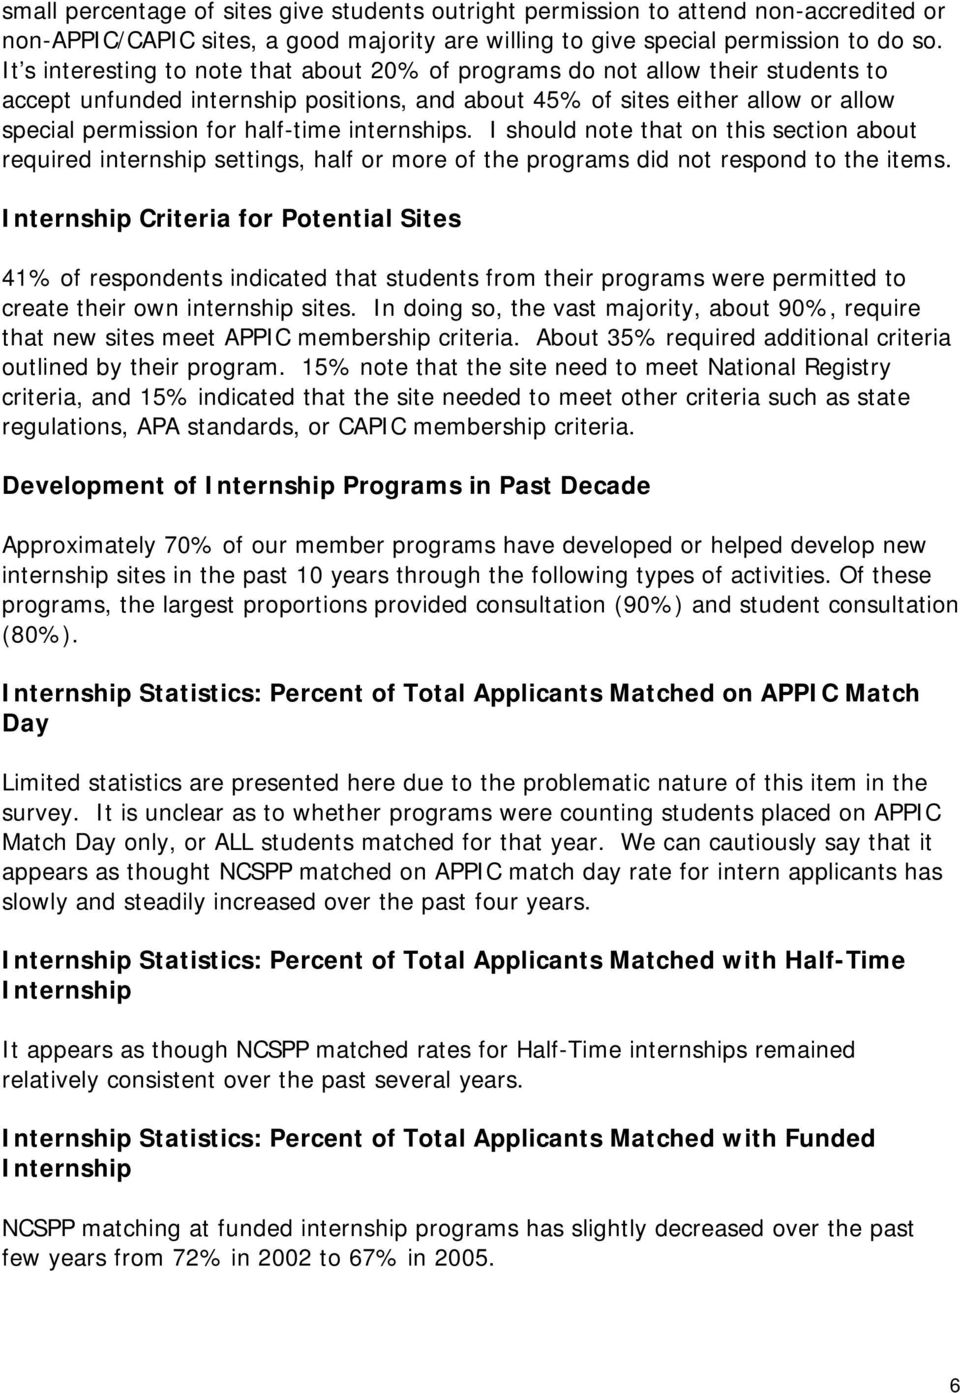 internships. I should note that on this section about required internship settings, half or more of the programs did not respond to the items.